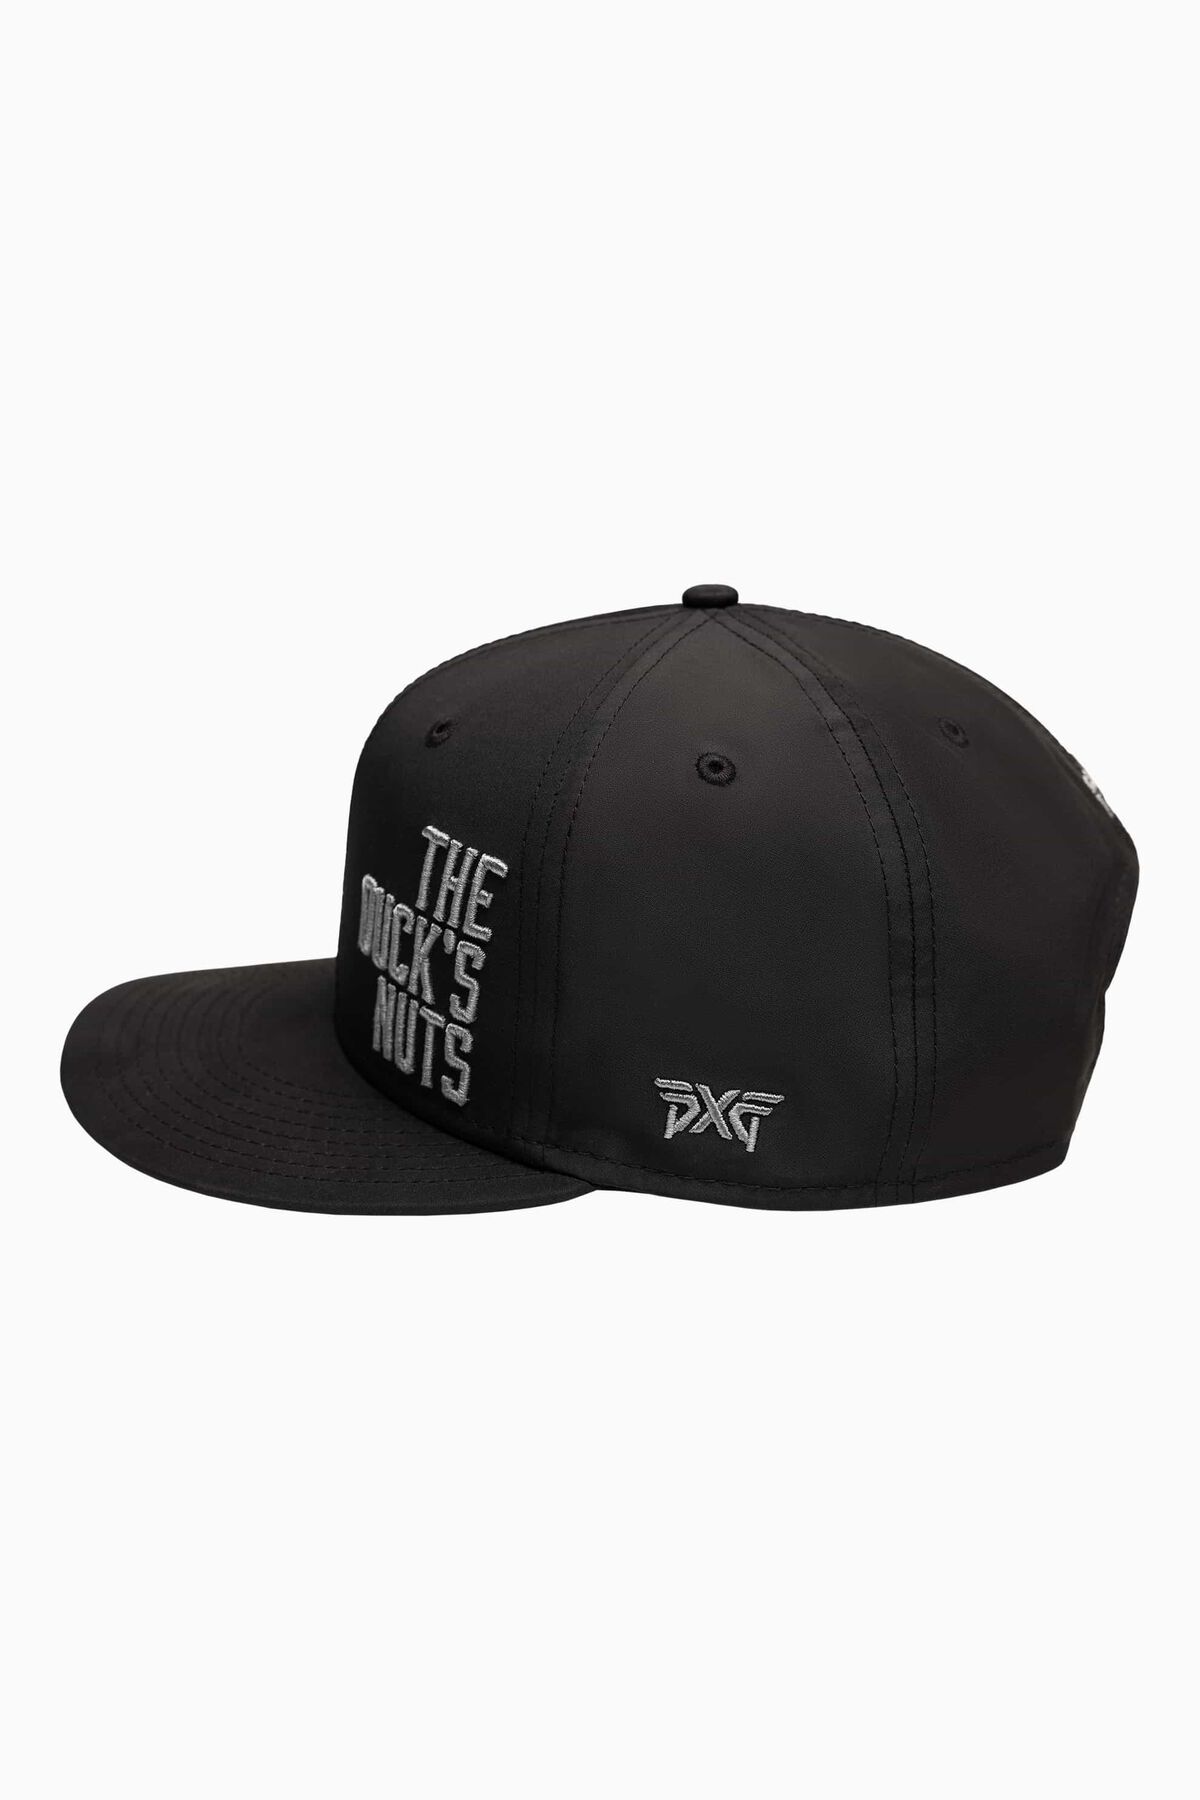 The Duck's Nuts 9FIFTY Snapback Cap 